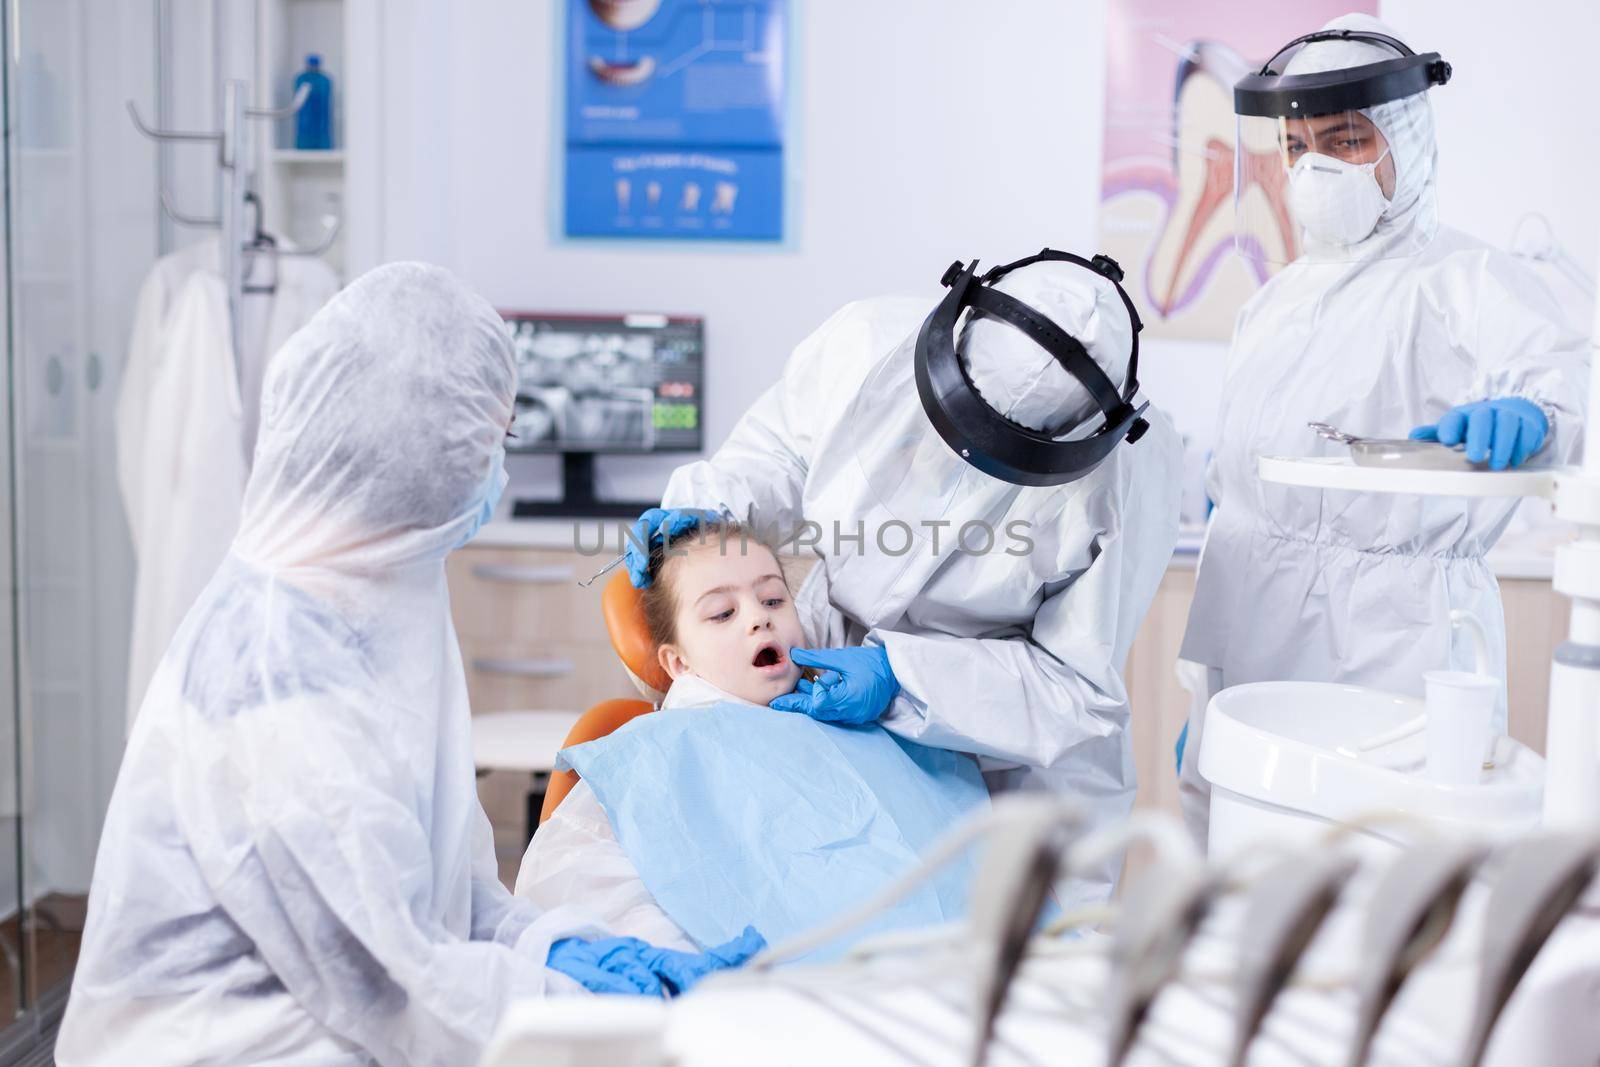 Pediatric stomatolog doing oral hygine procedure on little girl with bib wearing ppe suit. Dentist in coronavirus suit using curved mirror during teeth examination of child.